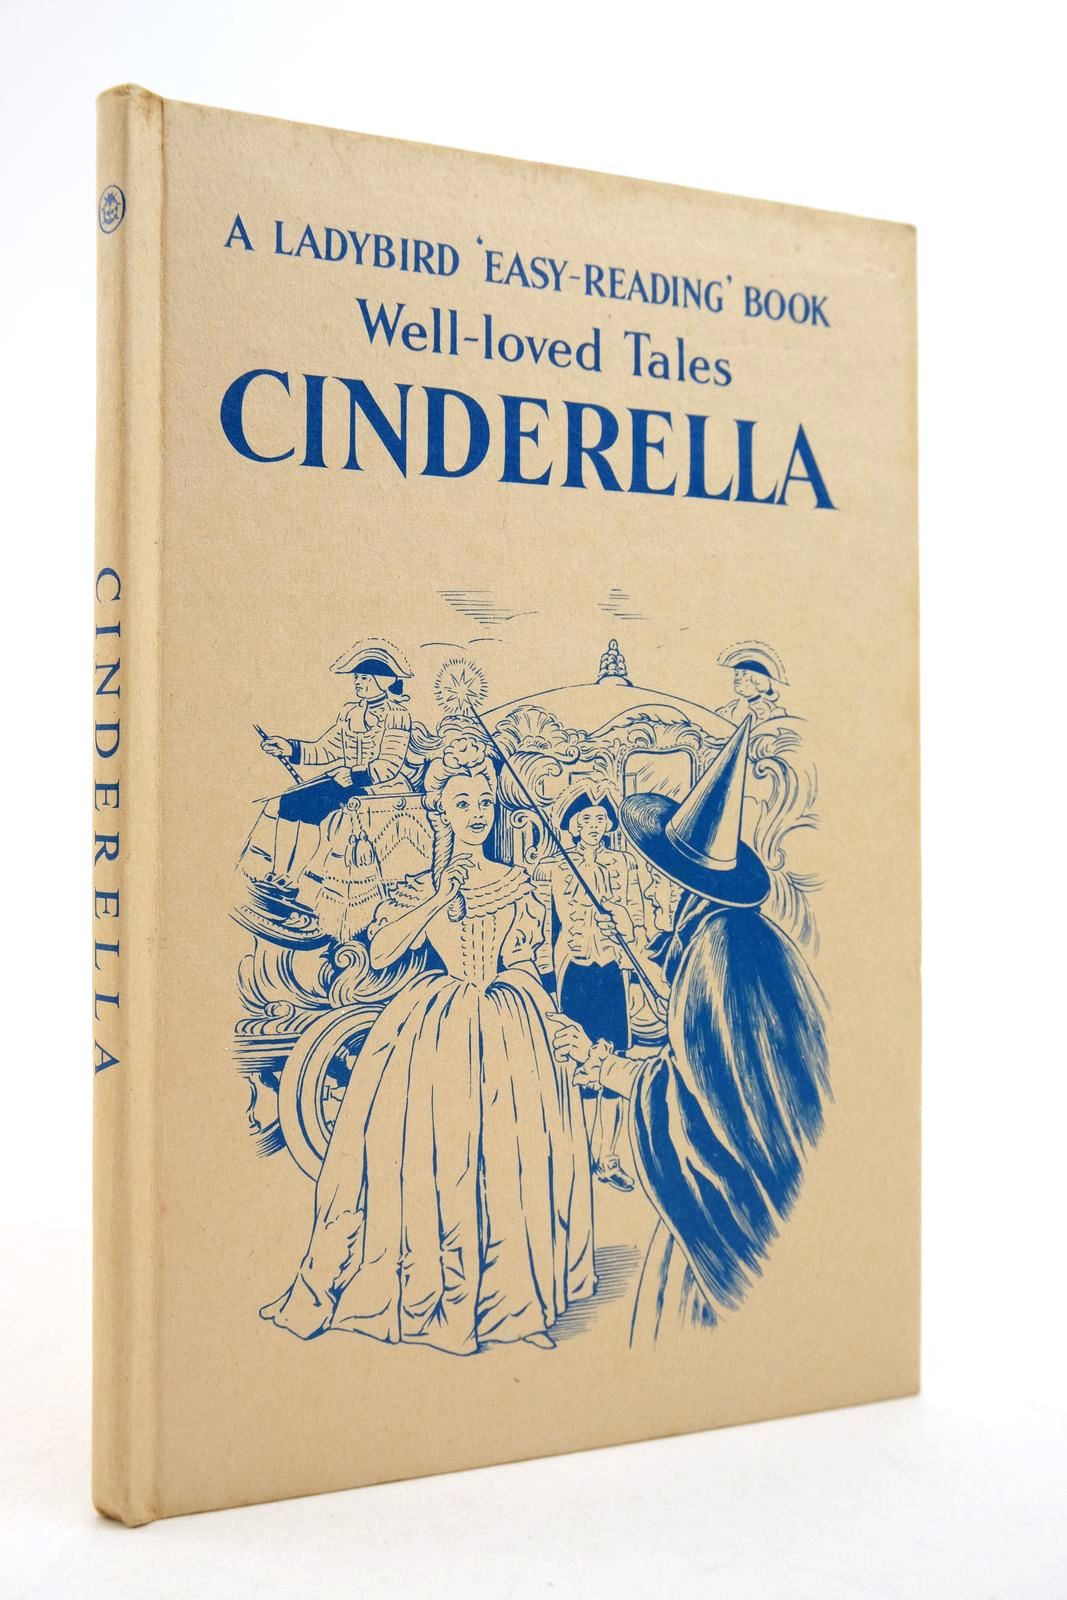 Photo of CINDERELLA written by Southgate, Vera illustrated by Winter, Eric published by Wills & Hepworth Ltd. (STOCK CODE: 2140210)  for sale by Stella & Rose's Books